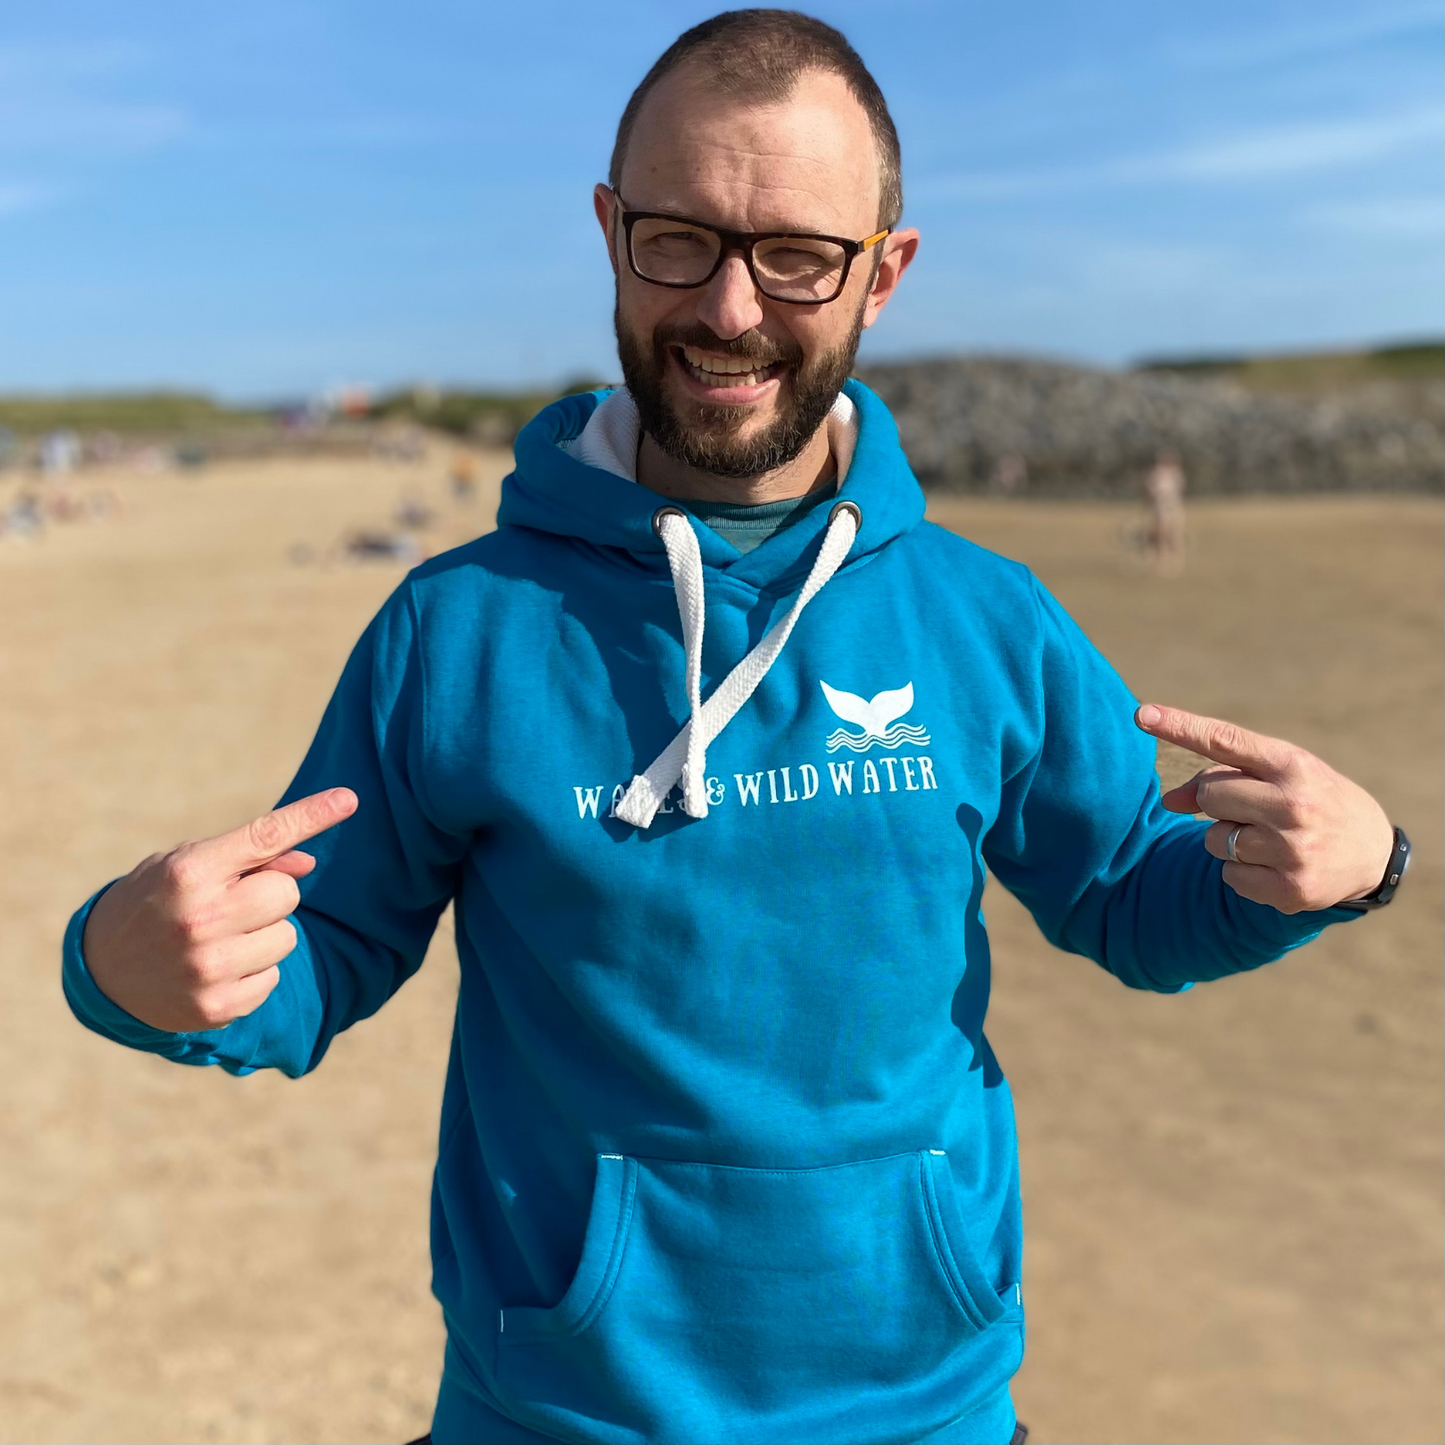 A man wearing a tropical blue hoodie and pointing to the Waves & Wild Water logo printed across his chest.